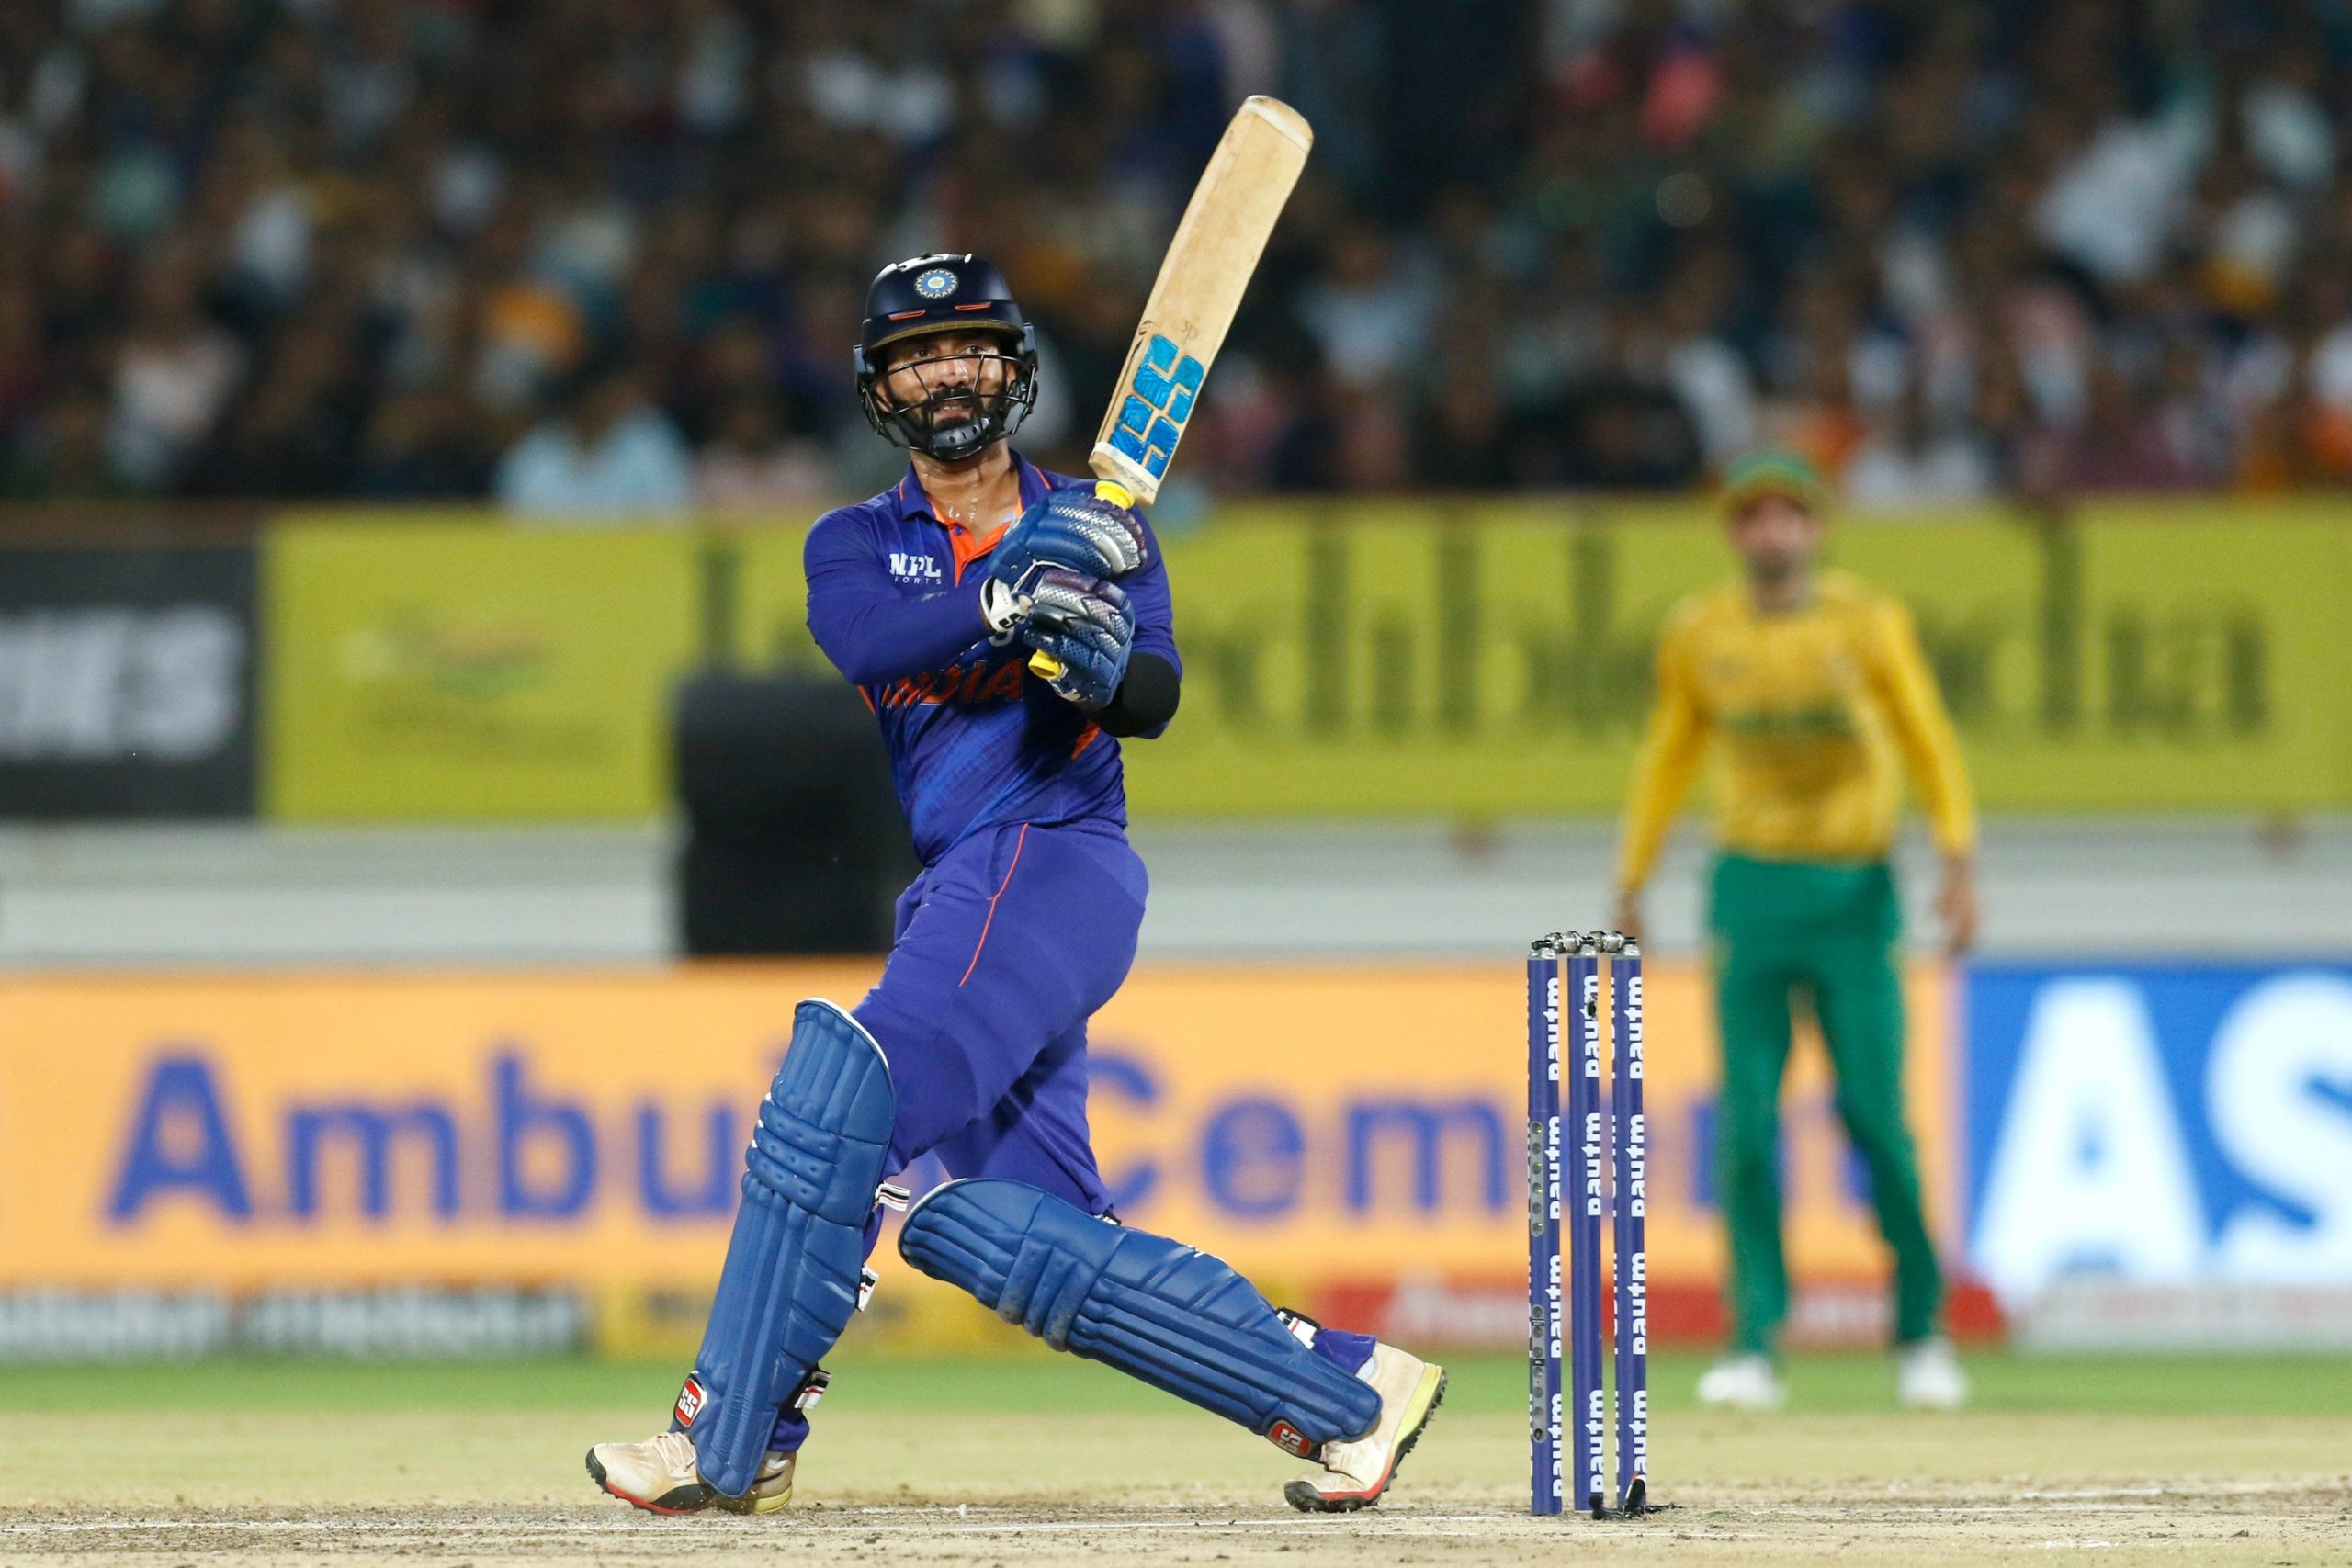 Ricky Ponting urges India to play Rishabh Pant and Dinesh Karthik together in the T20 World Cup